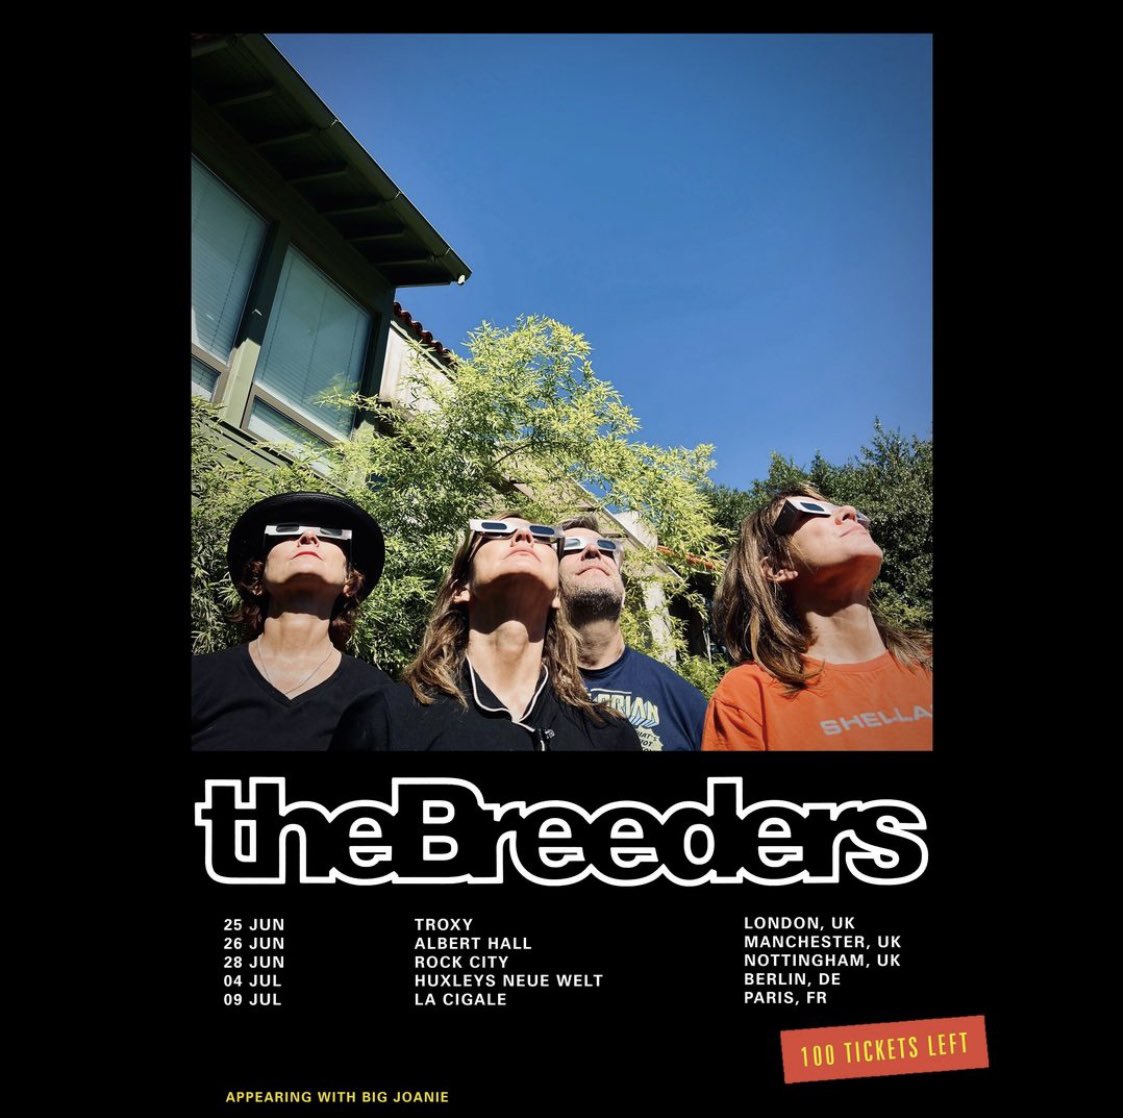 📢 News just in - only 100 tickets left for these dates with @thebreeders so don’t sleep on ‘em ‼️ Available at thebreedersmusic.com